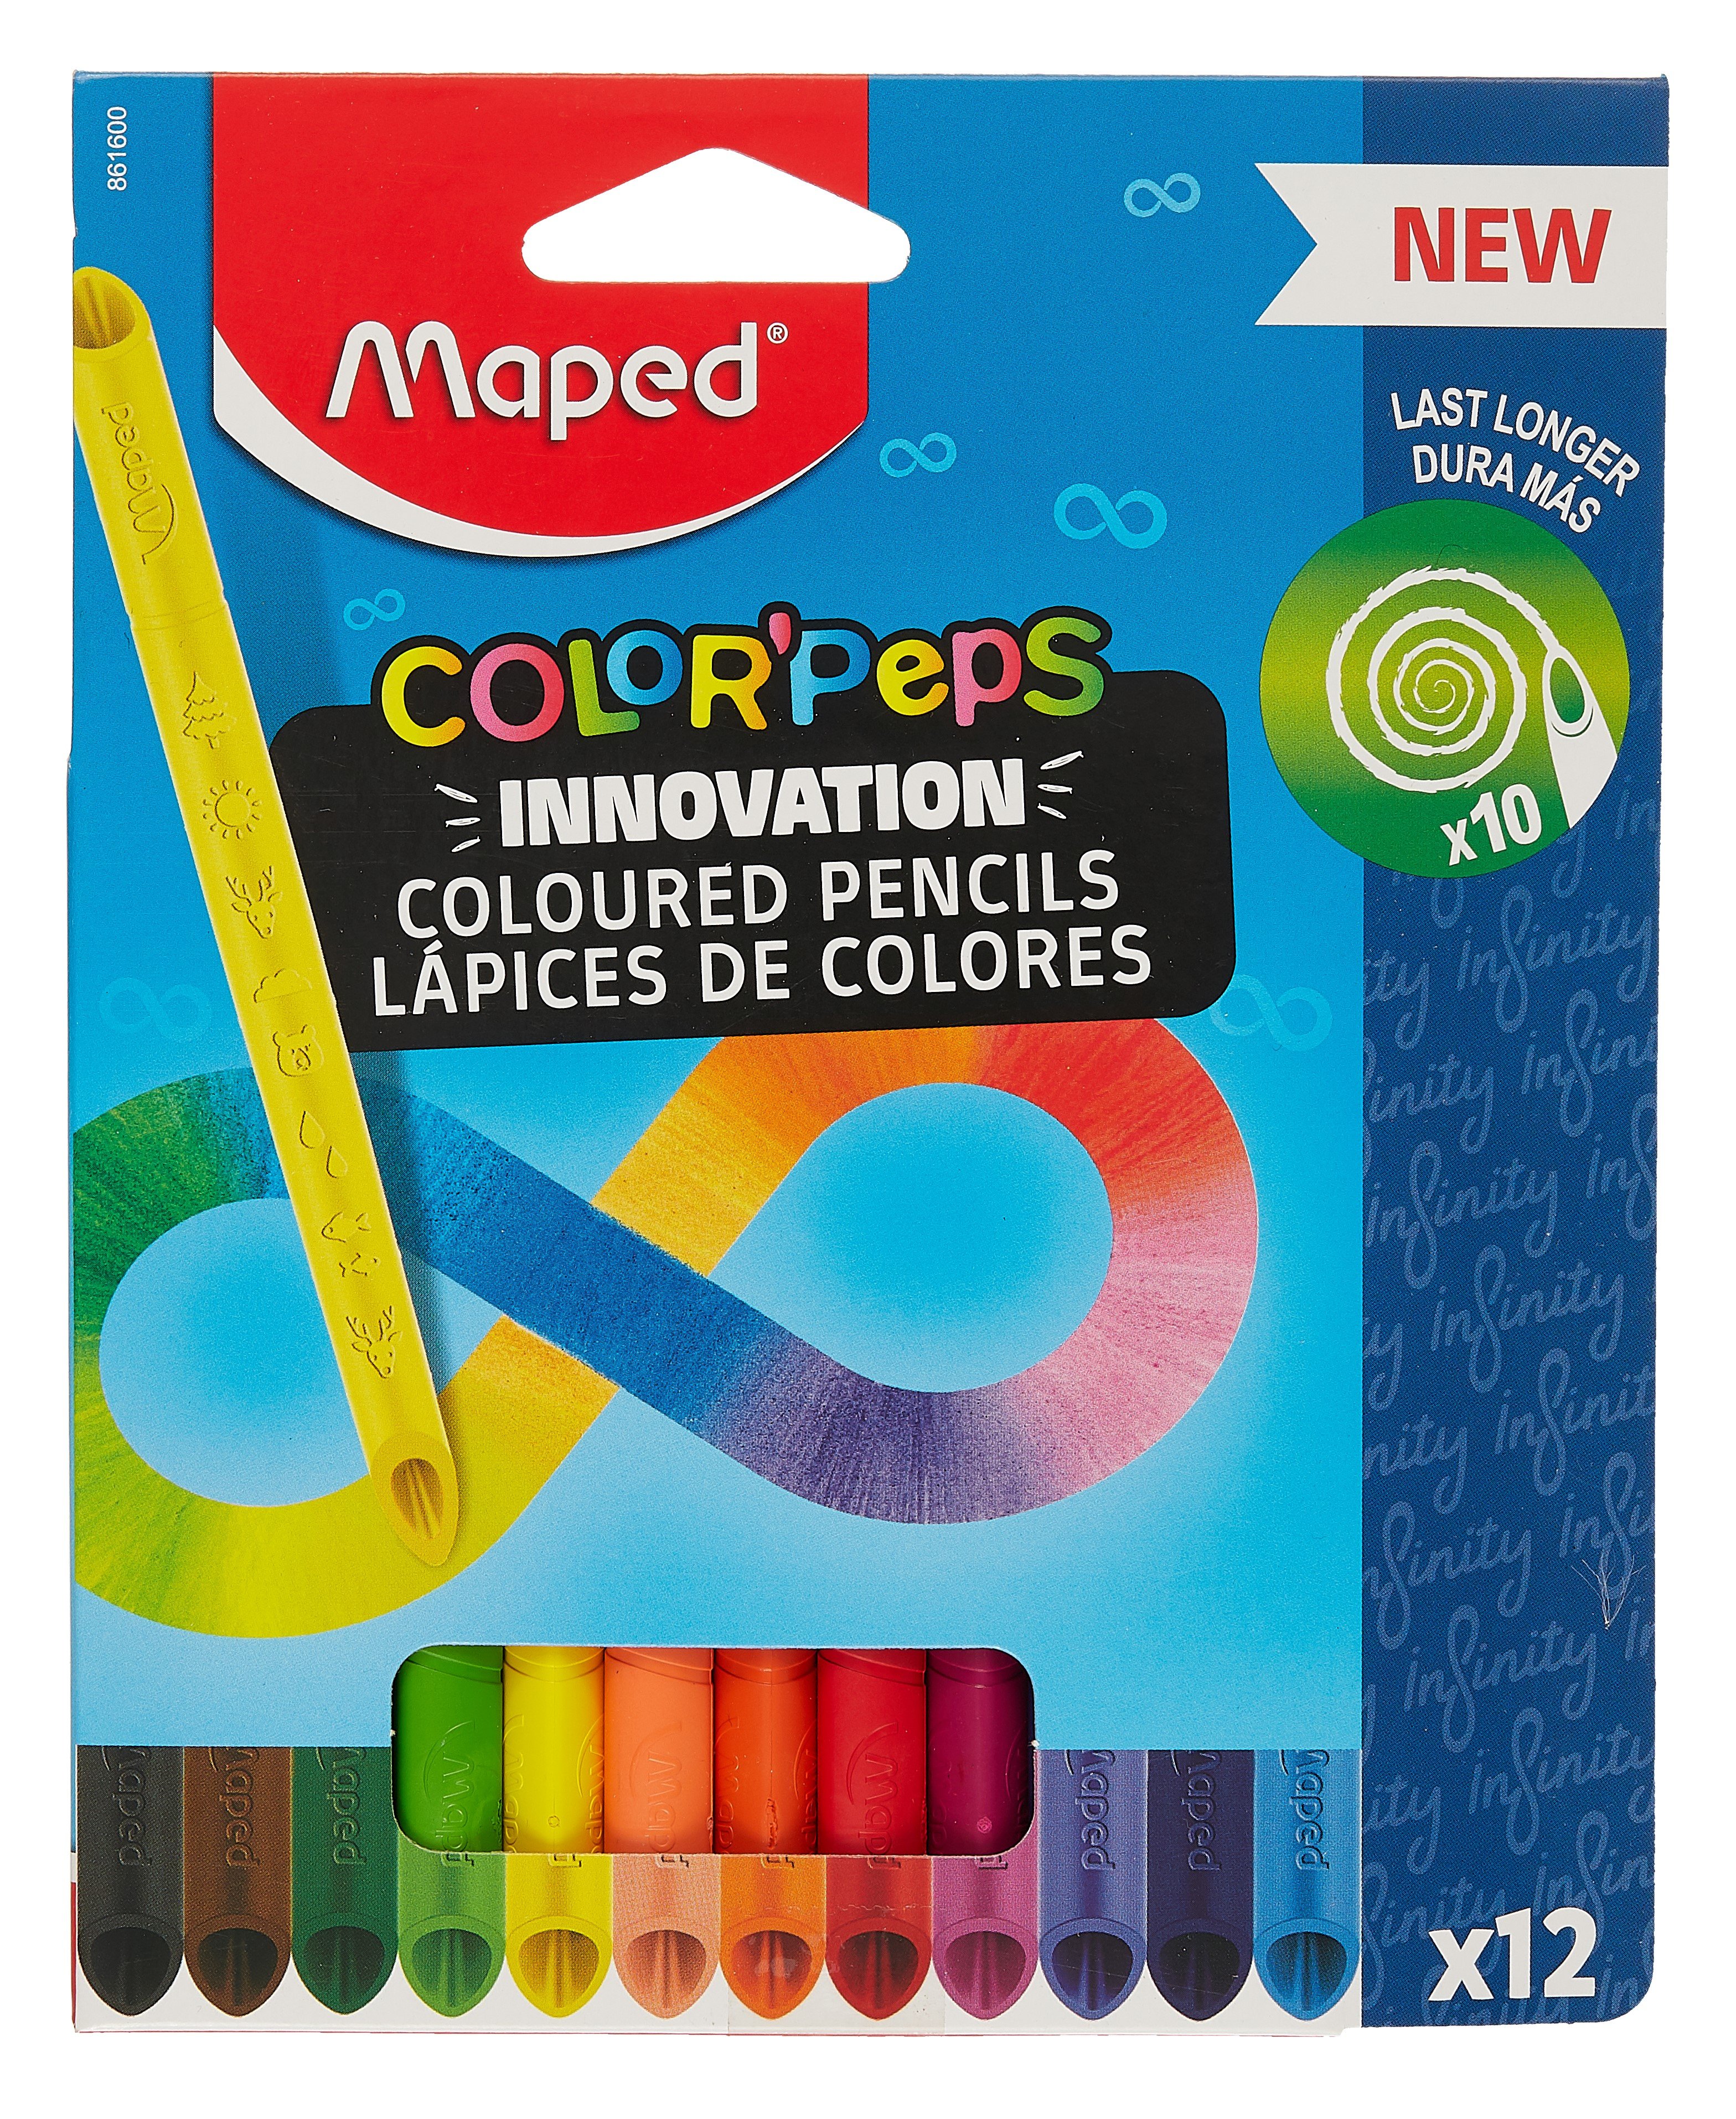   12 COLORPEPS INFINITY , 